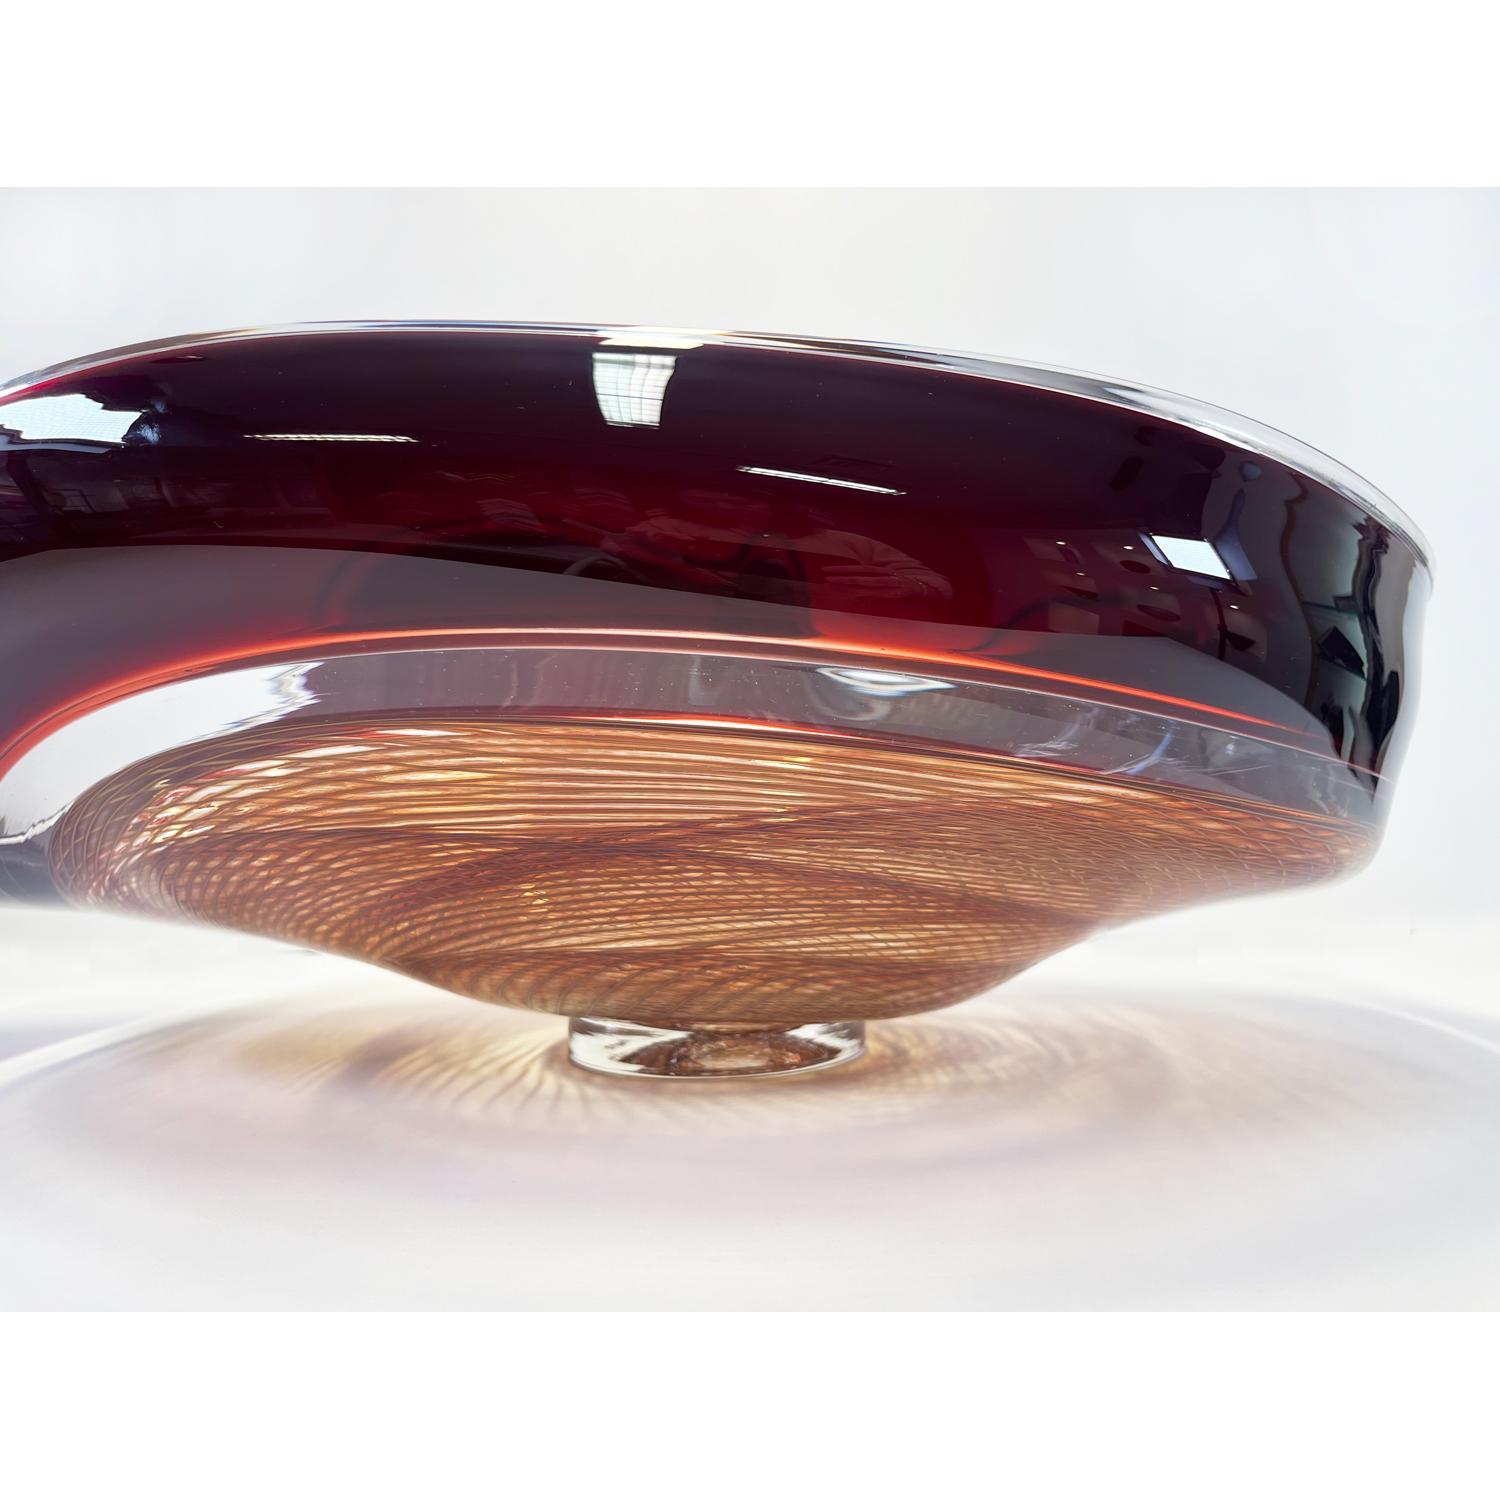 This Amber/Autumn Red Rondelle Bowl is a continuation of David's work with cane. Fusing his signature wave bowl motif with his newer rondelle cane pattern. This beautiful glass bowl is sure to be a showstopper in your space. 

David Thai is a